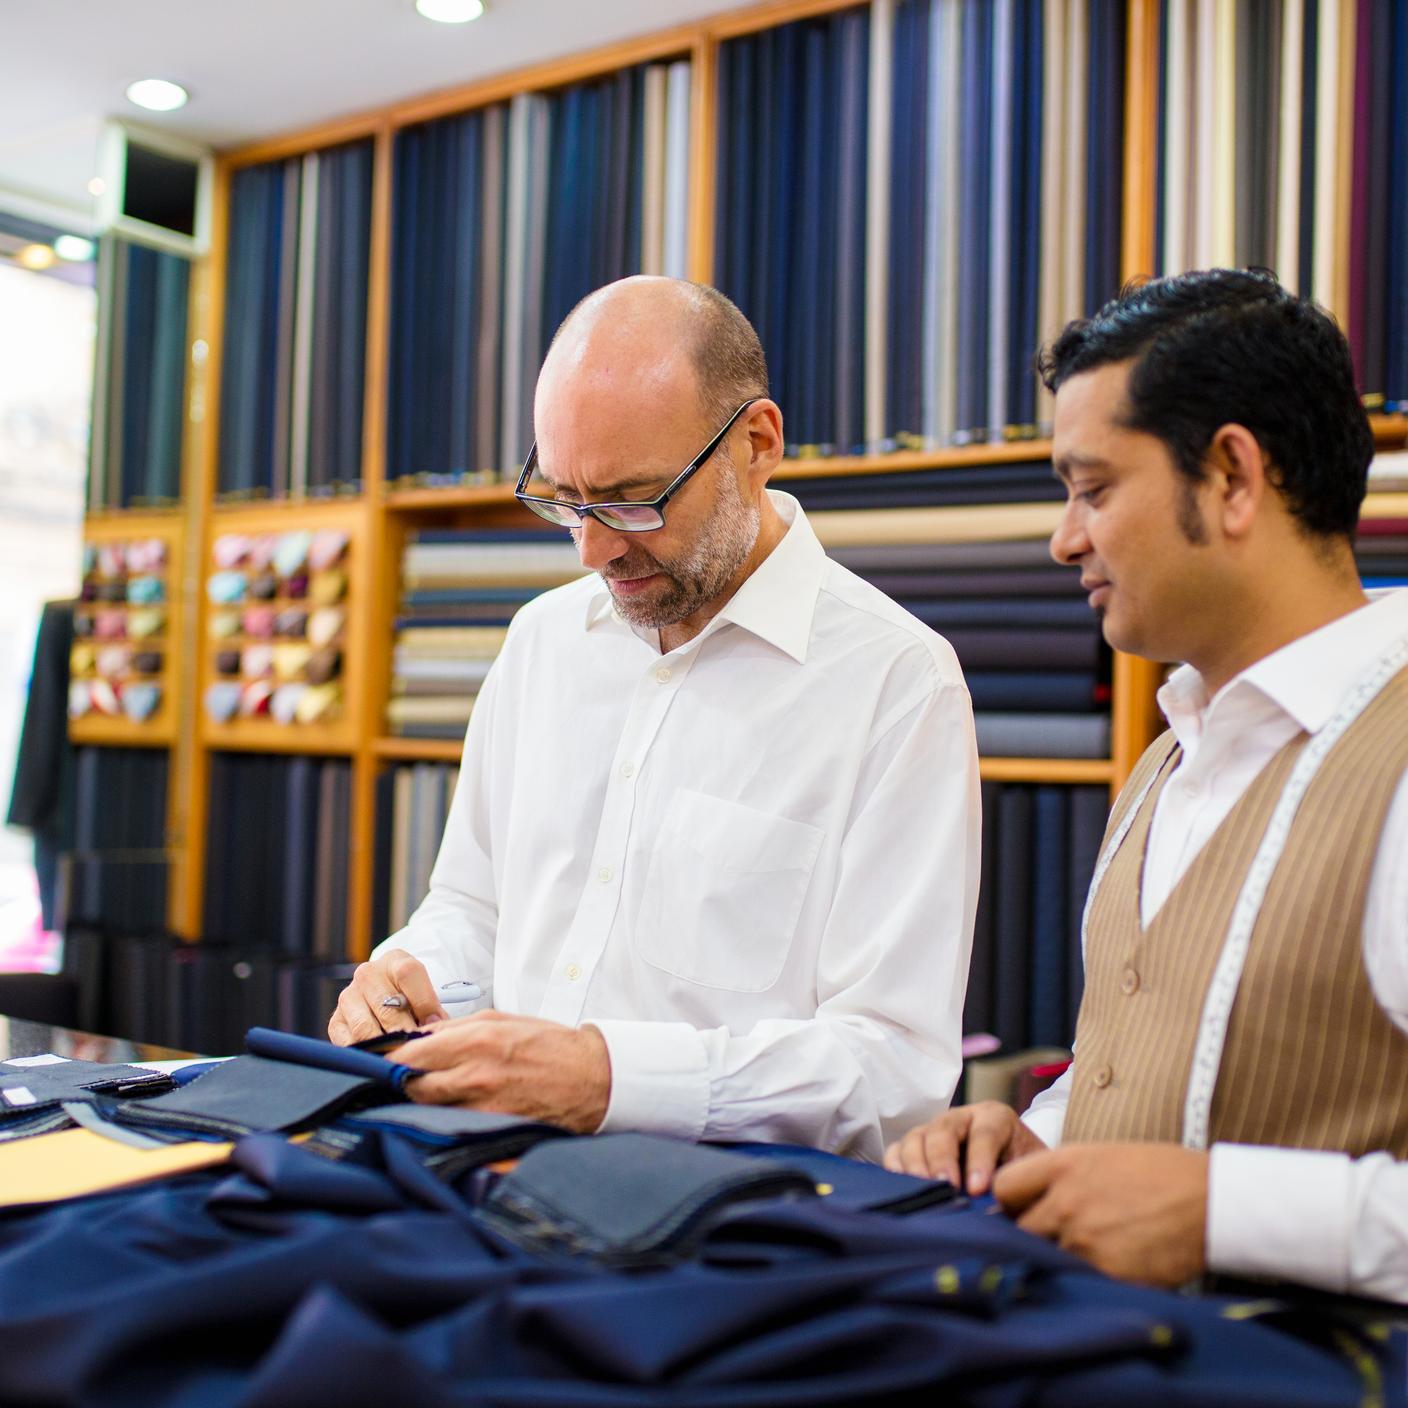 Customer and Tailor looking at fabric swatches in a tailor's shop